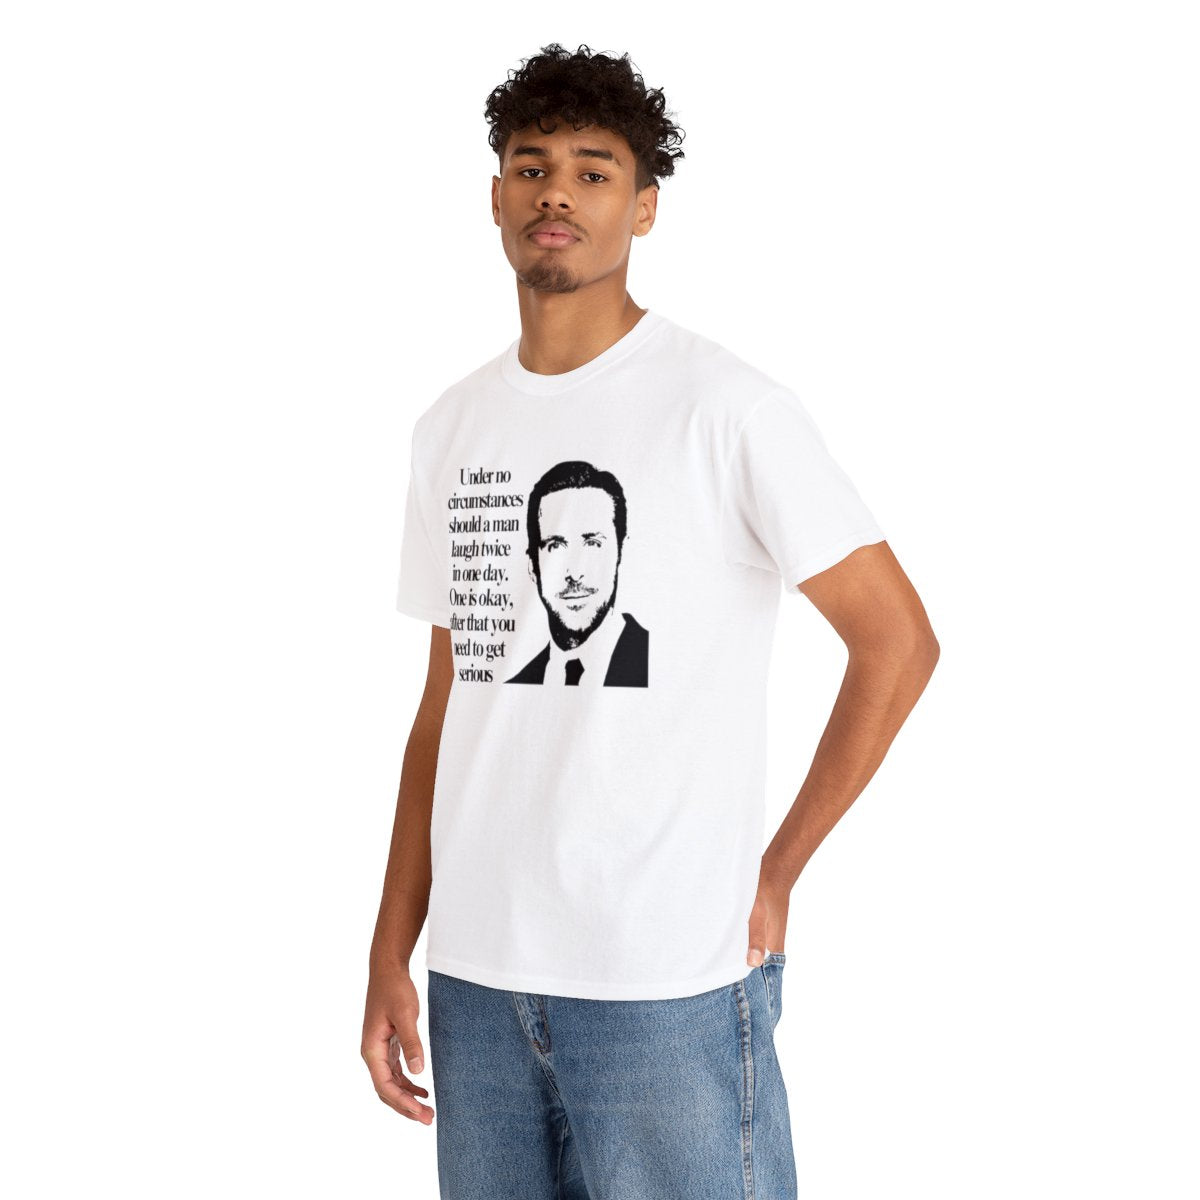 Under no circumstances should a man laugh twice in one day (Ryan Gosling) - Unisex Heavy Cotton Tee